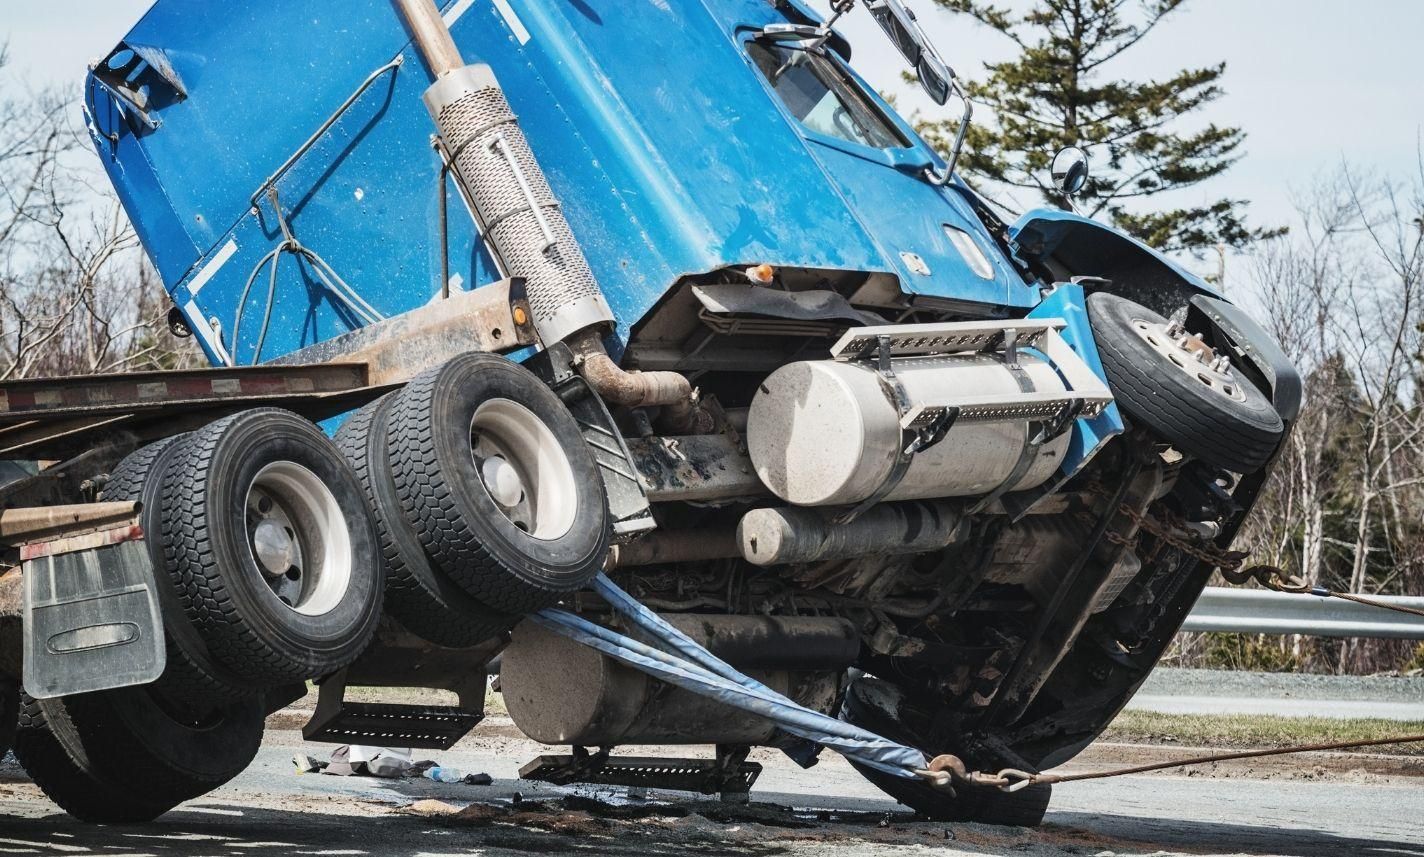 remerton-commercial-truck-accident-injury-lawyer